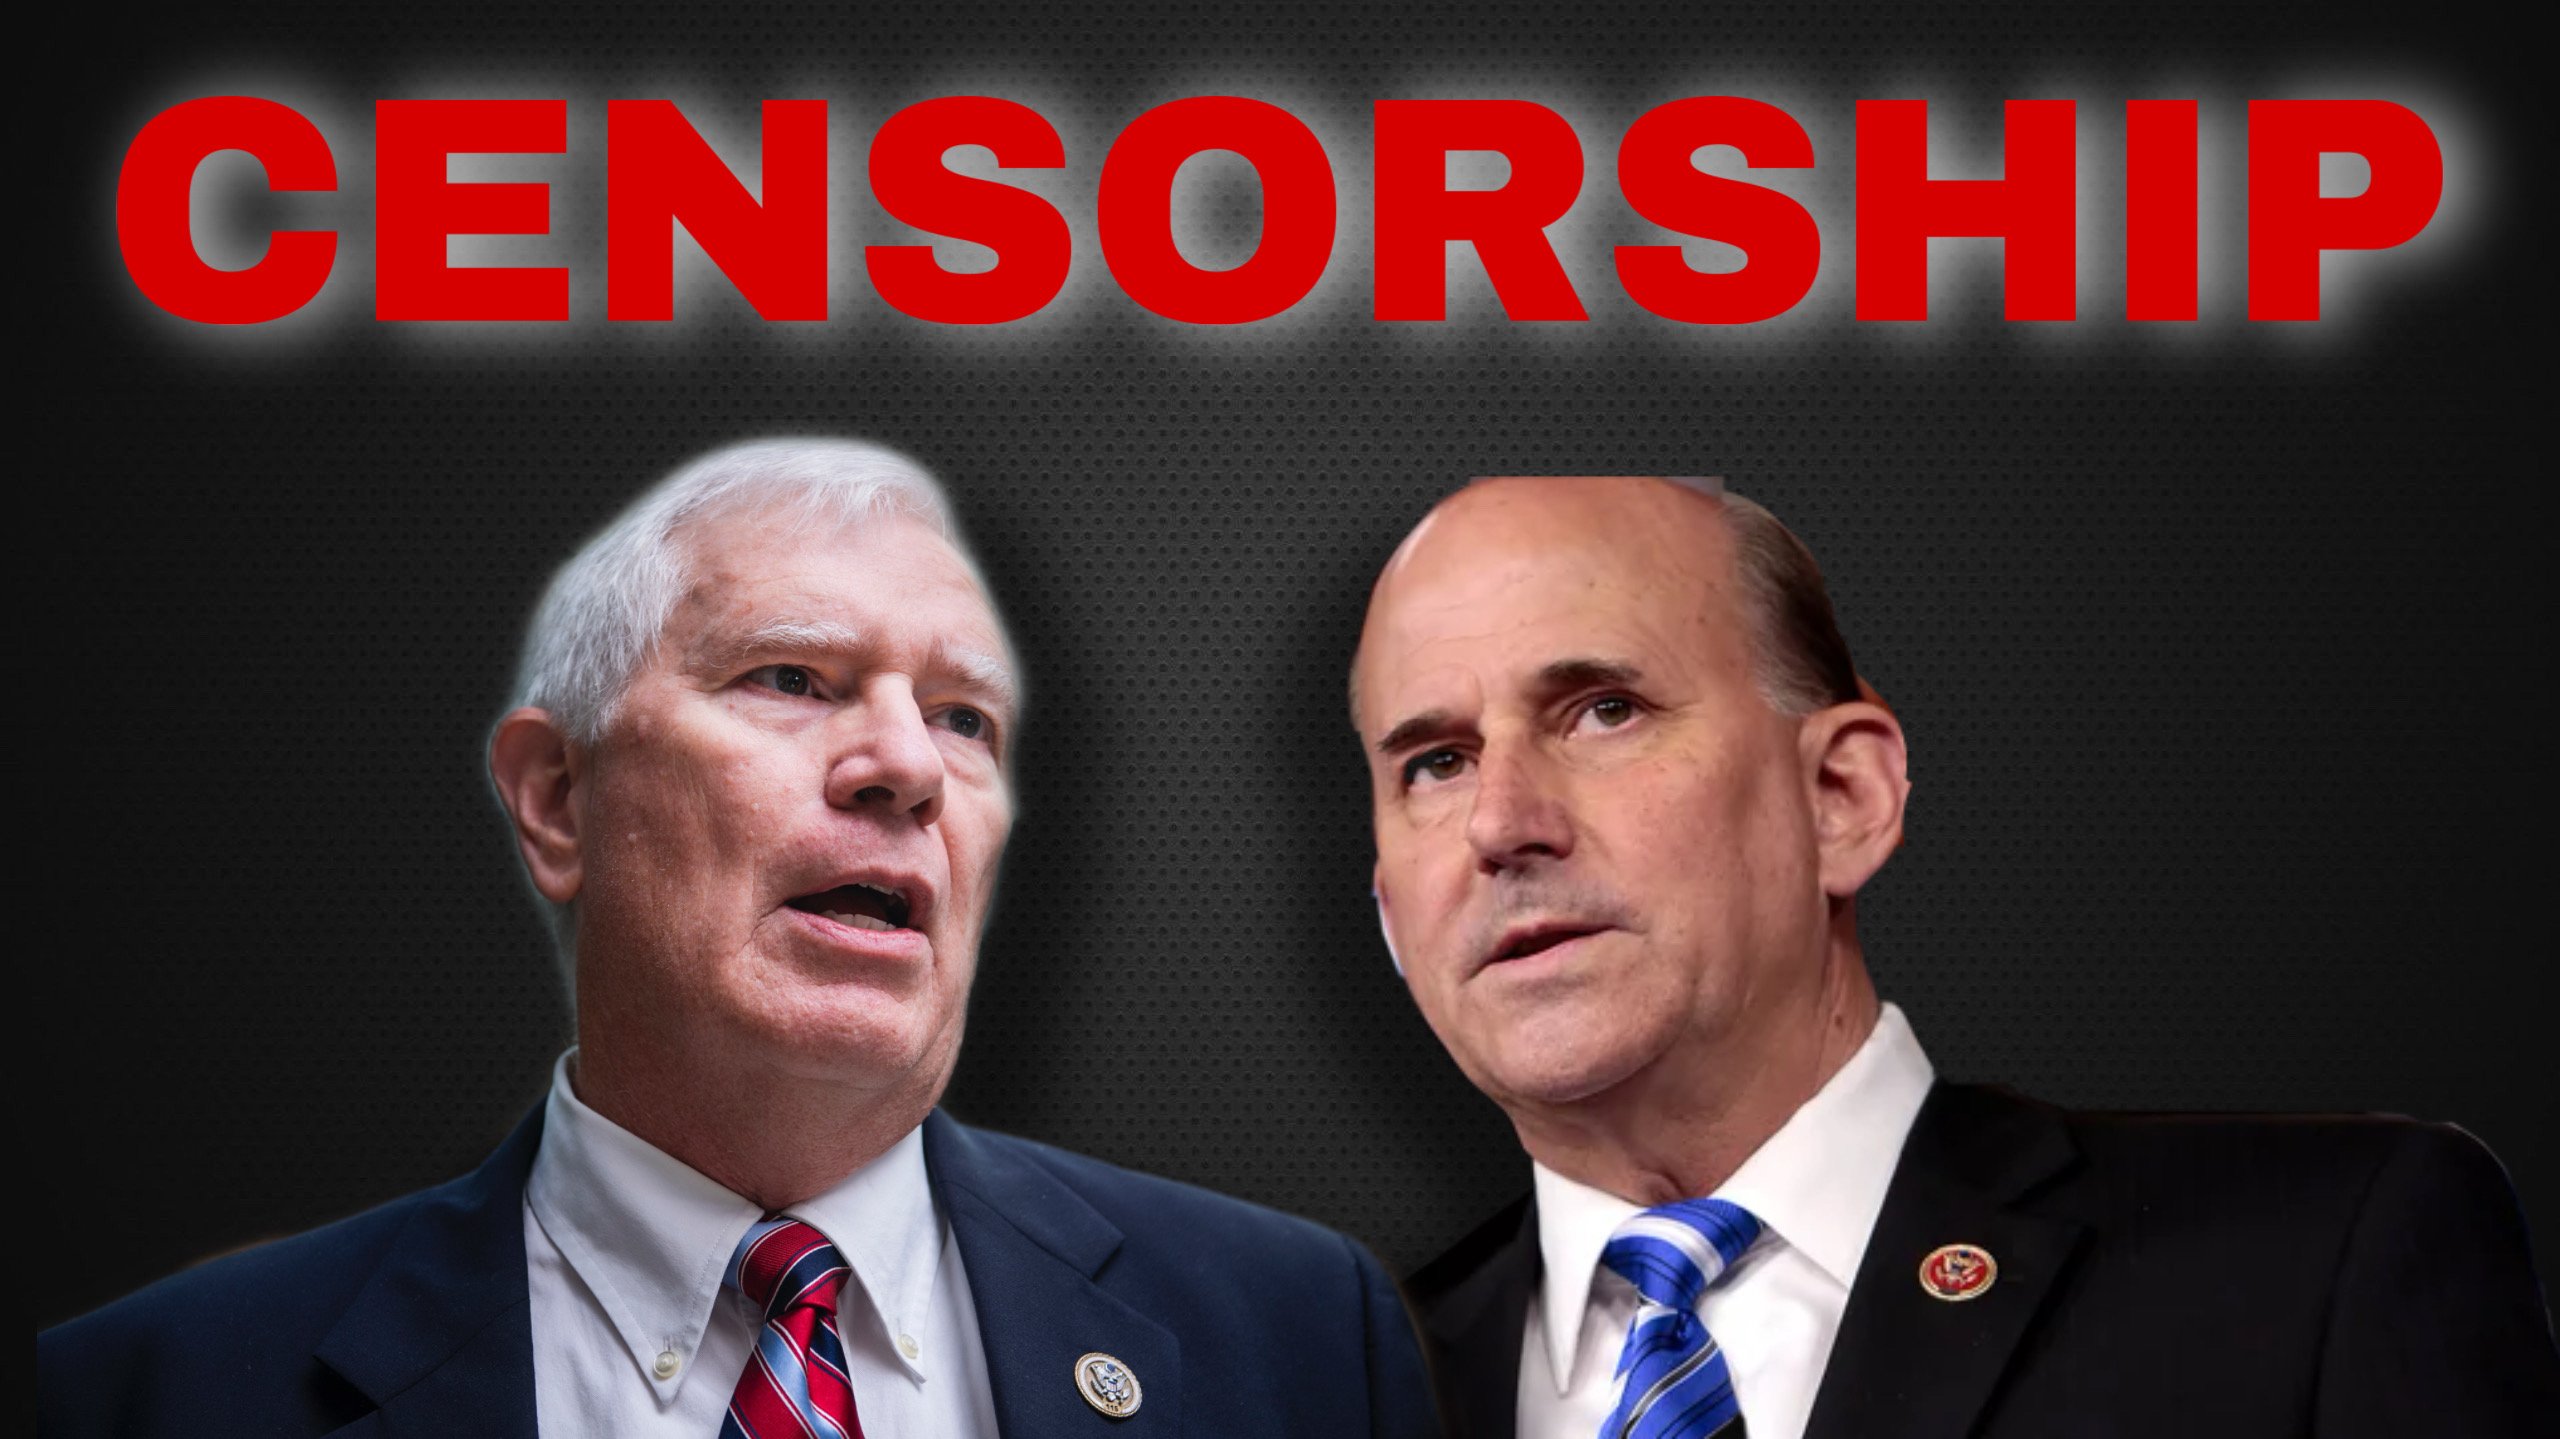  PURE EVIL: Democrats to Censure Mo Brooks and Louie Gohmert in Coming Days for Challenging Election Fraud and Blaming Riots on Them